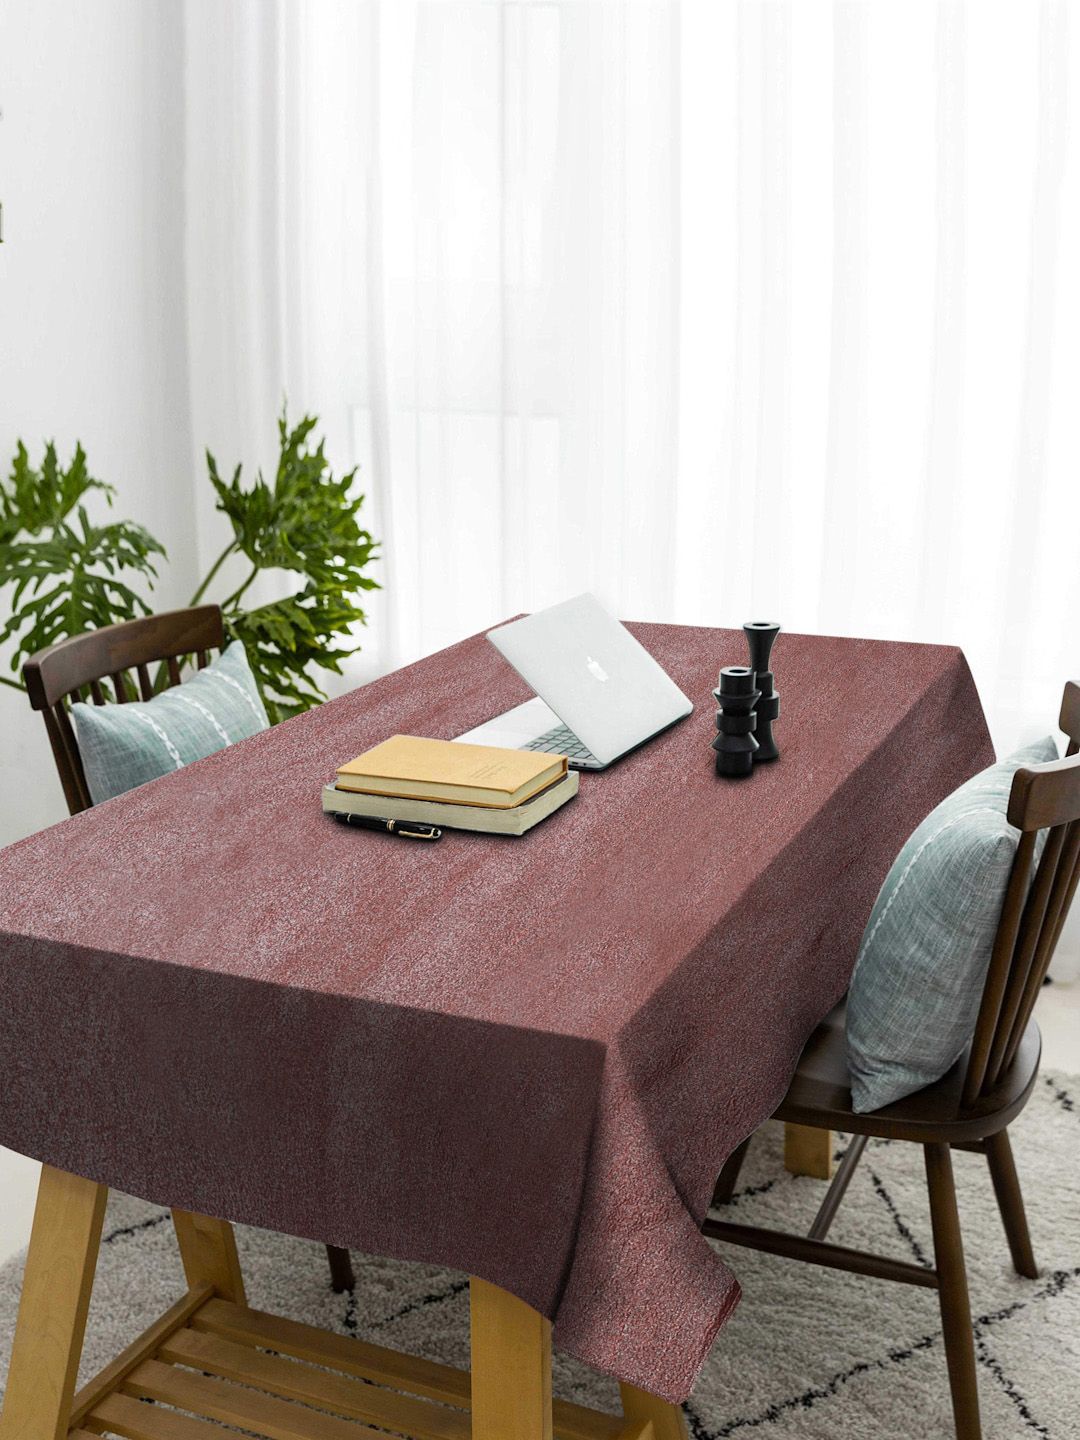 KLOTTHE Rust Woven Design 6 Seater Rectangular Table Cover Price in India